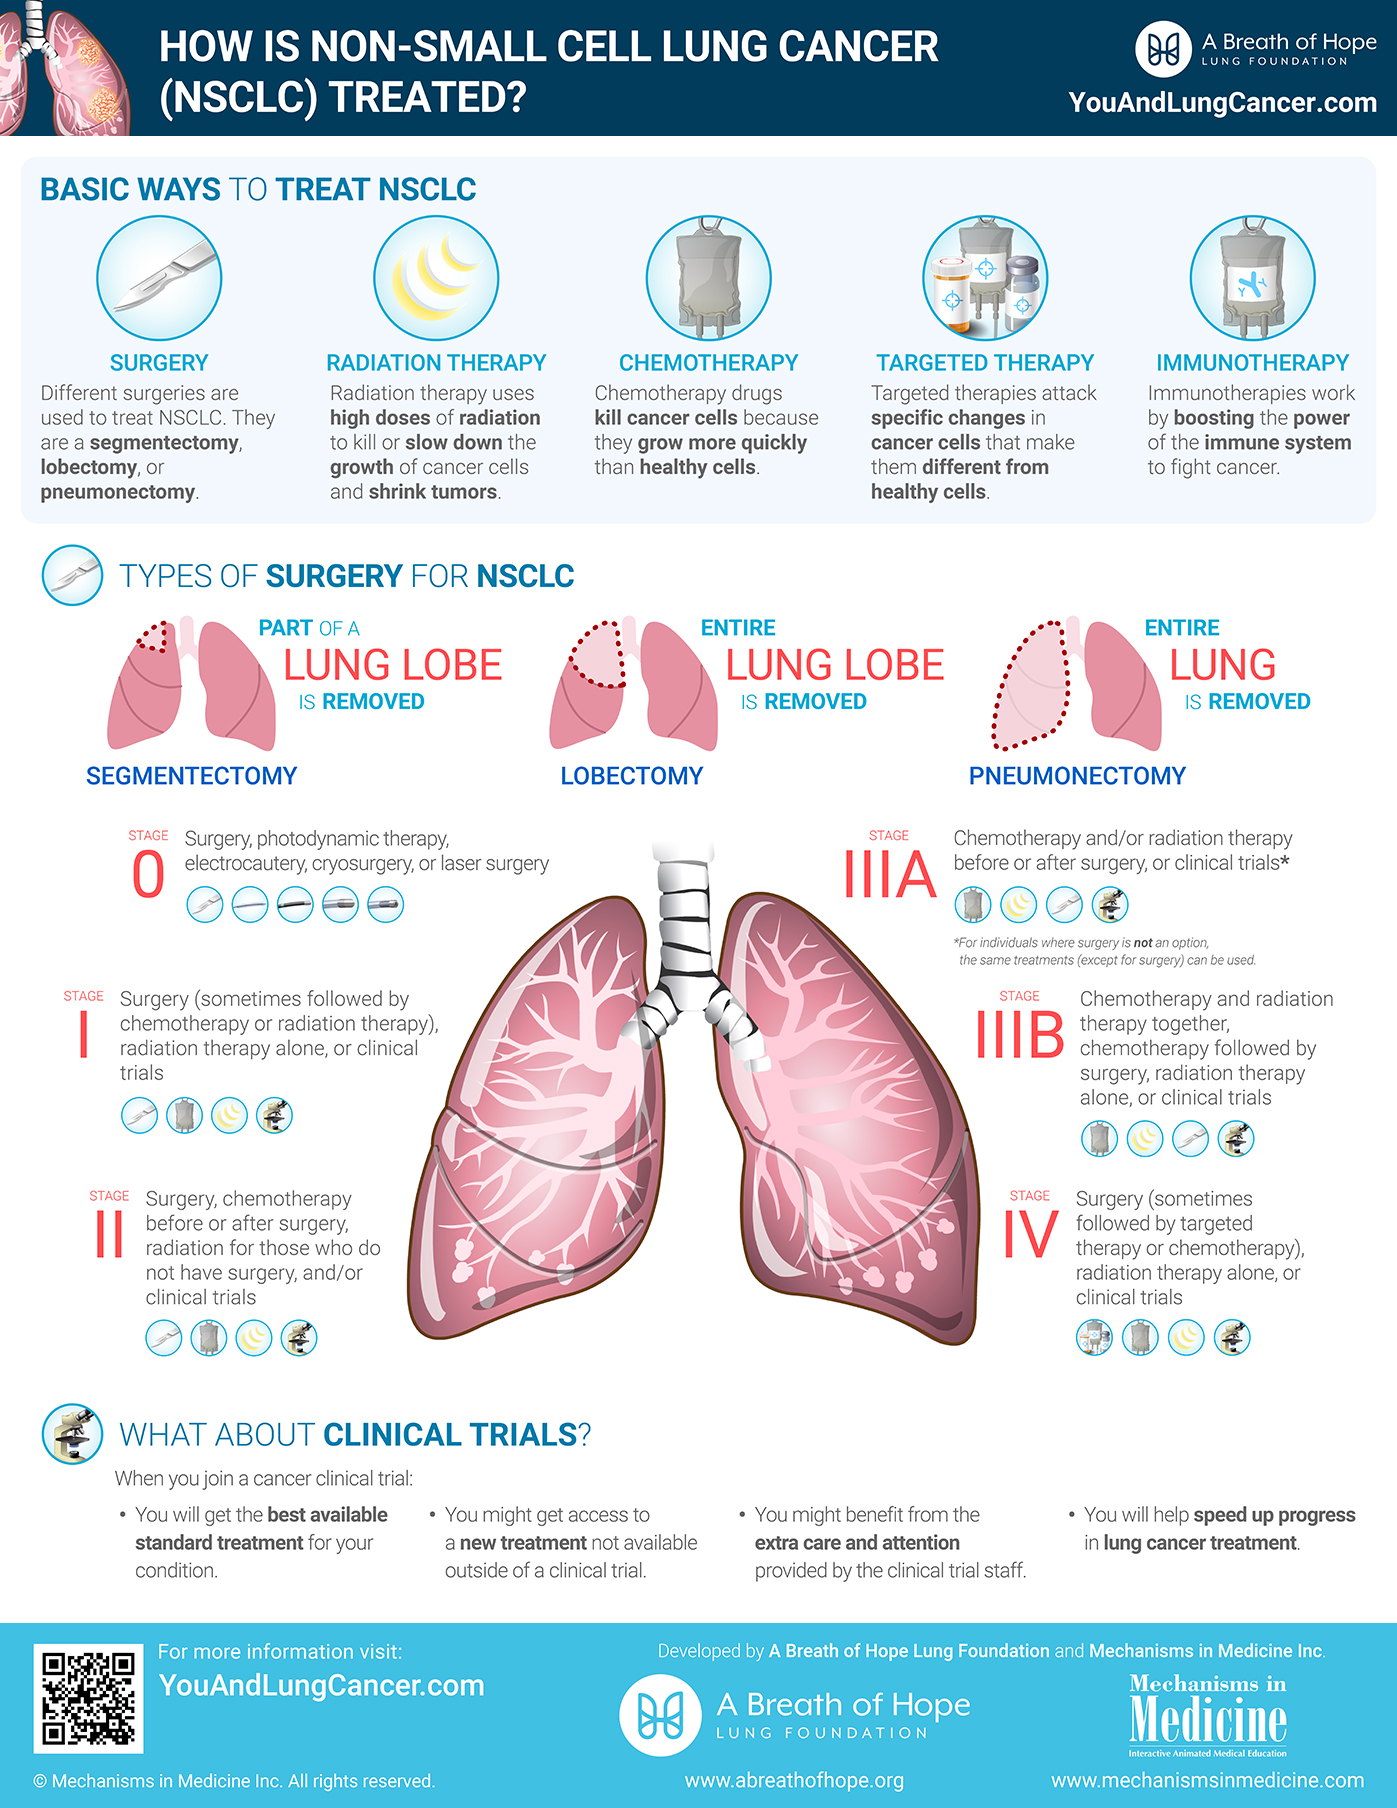 How is NonSmall Cell Lung Cancer (NSCLC) Treated?